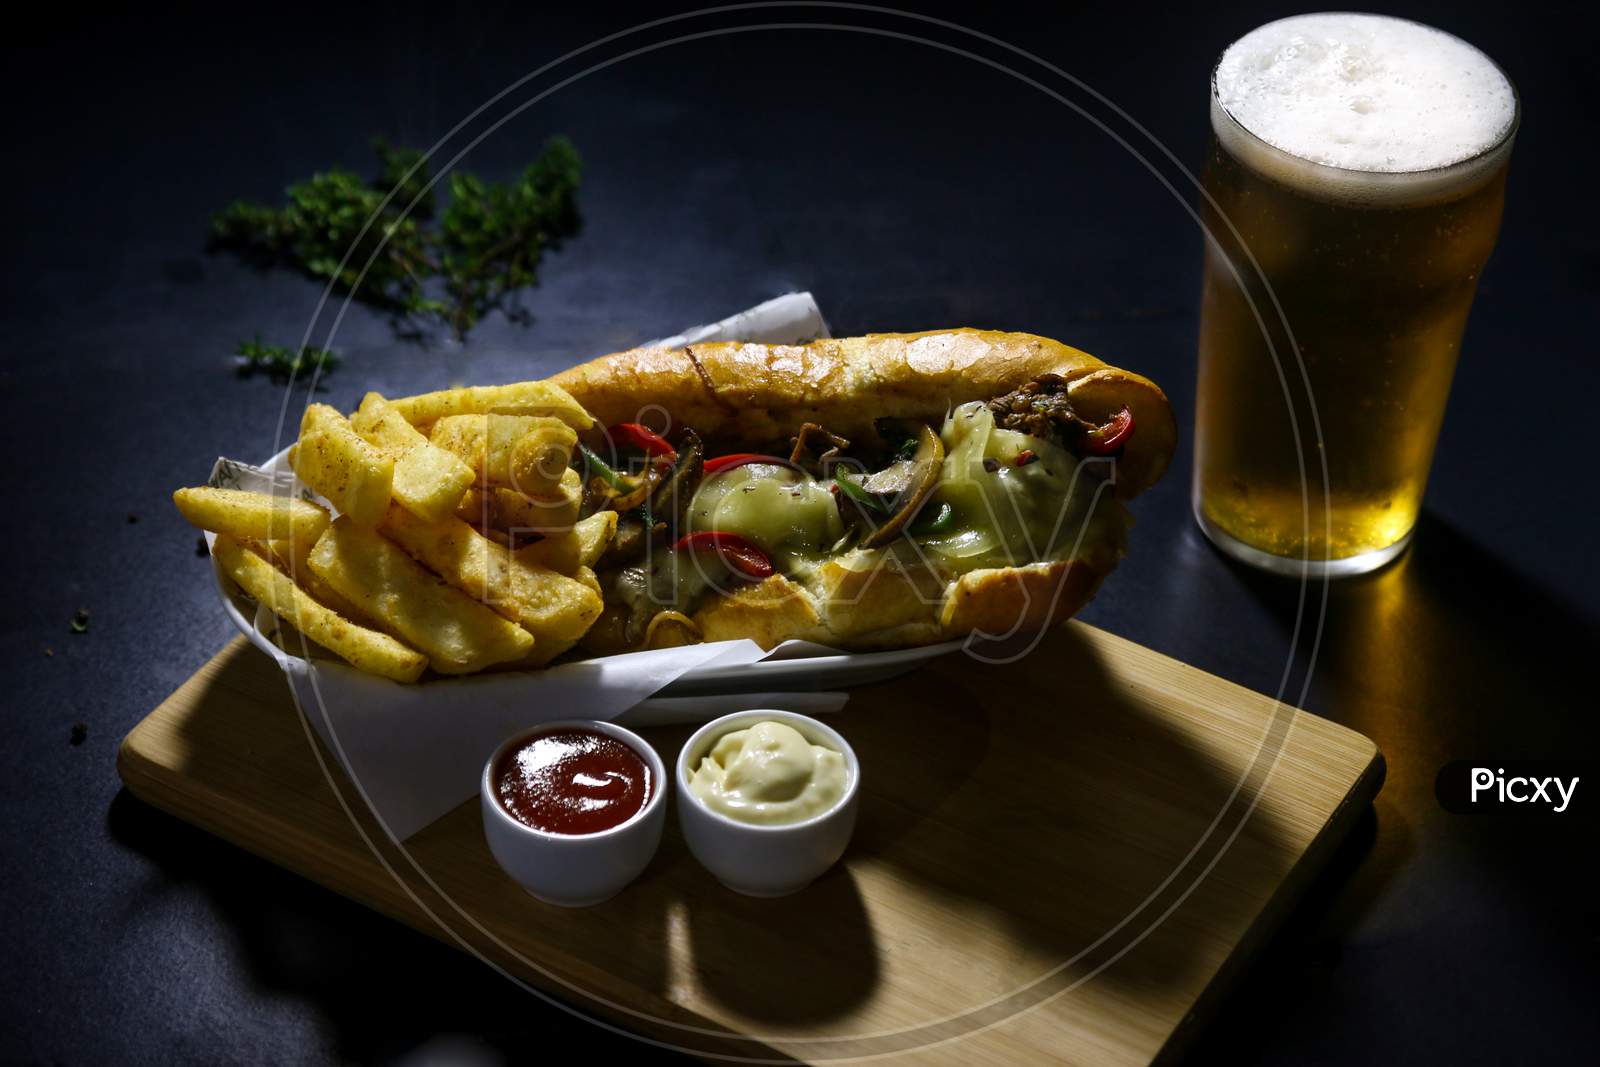 Beef focaccia with chips and beer glass